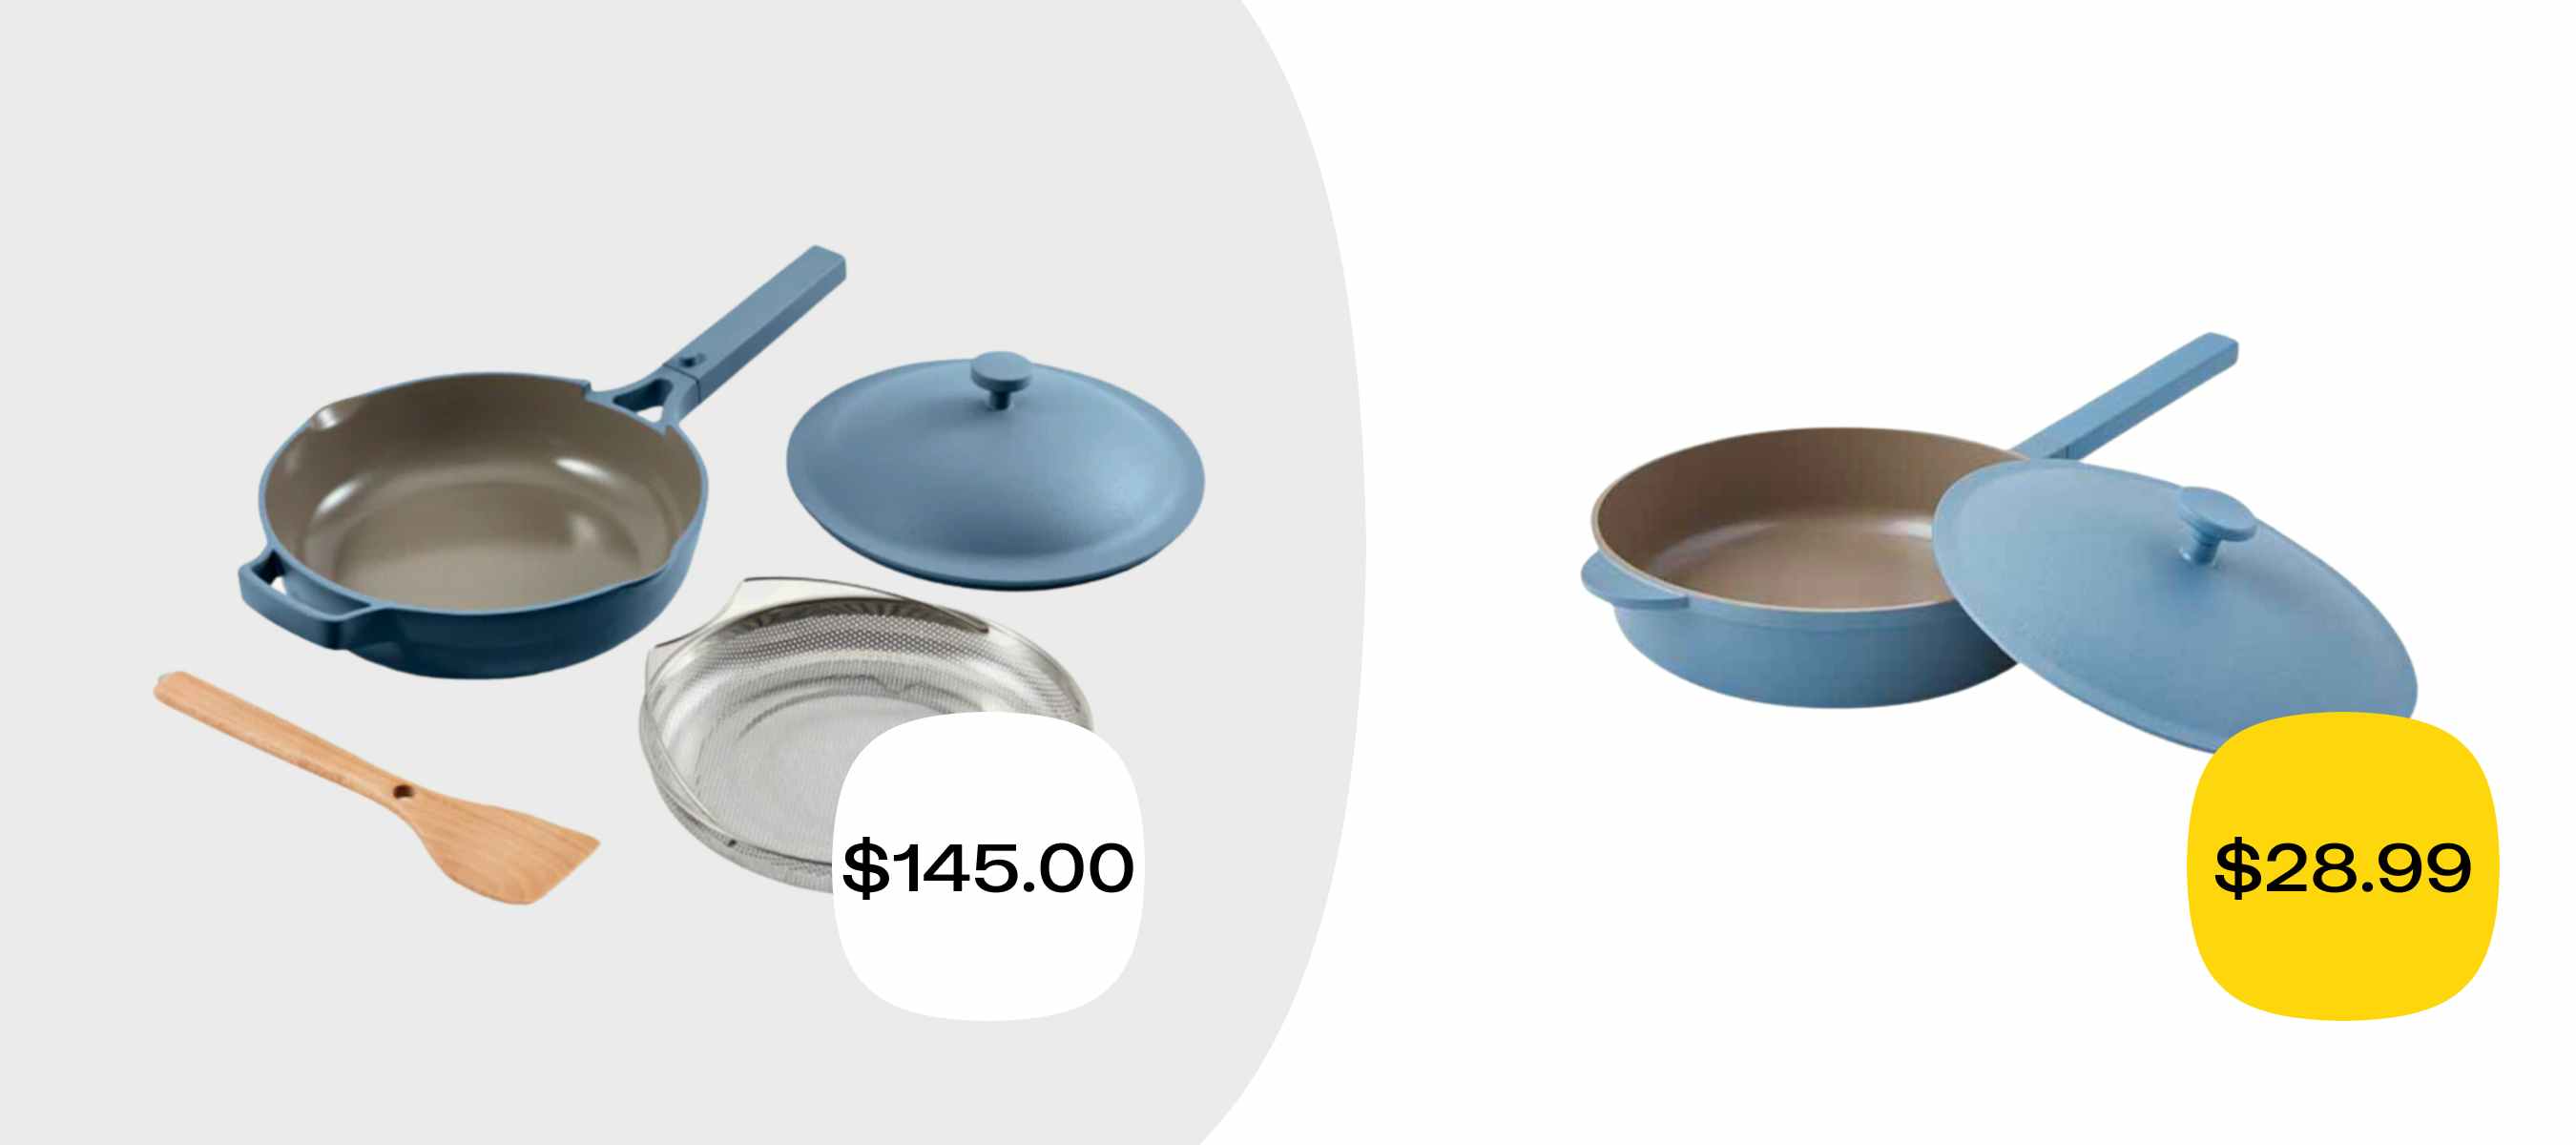 ALDI Just Released a Dupe of the Acclaimed Always Pan